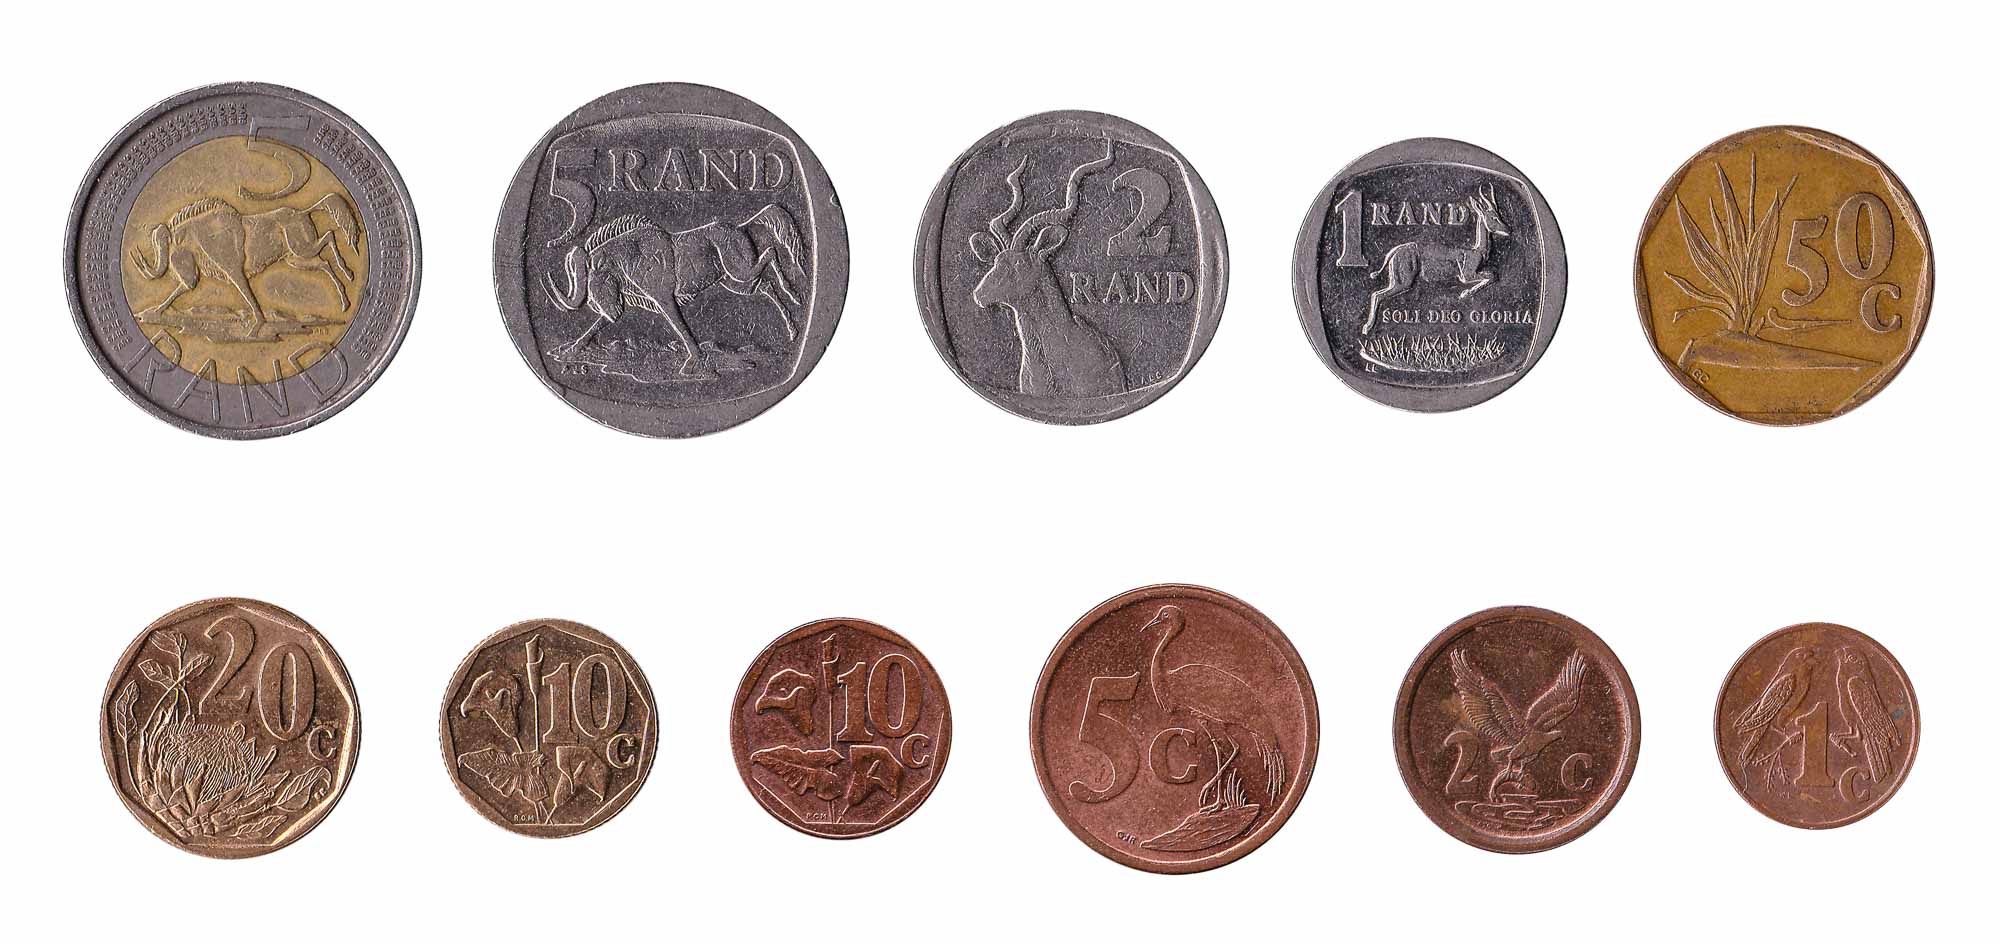 South African Rand coins.